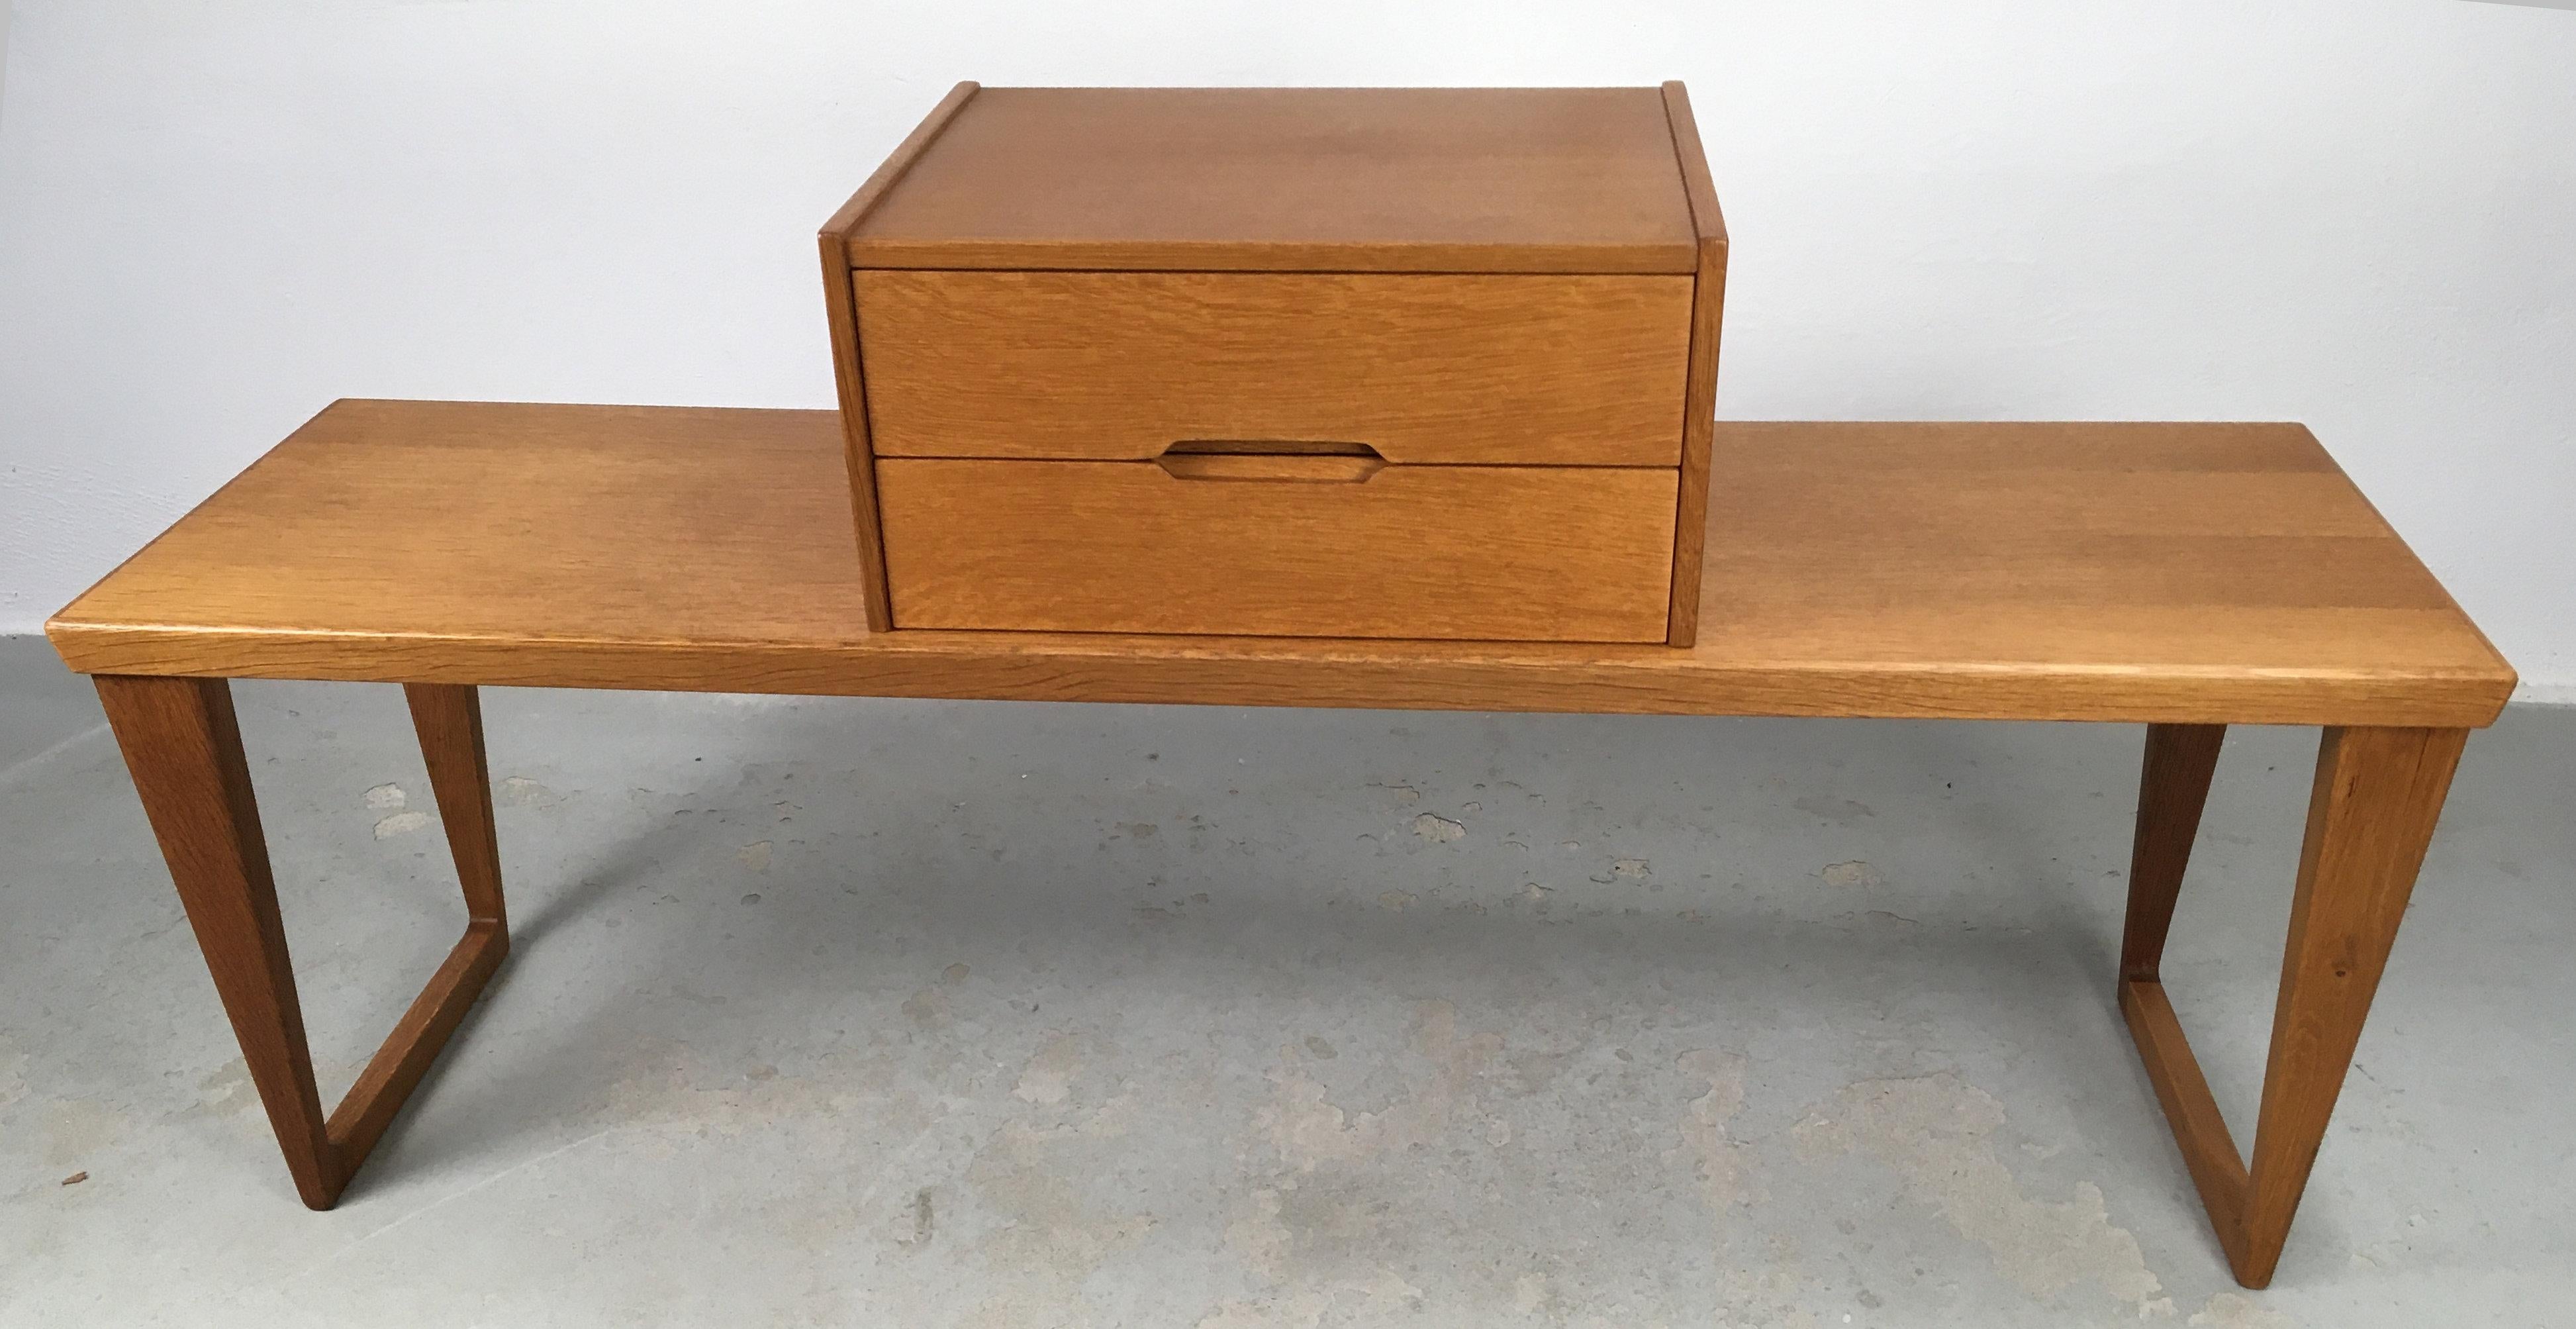 Enterance hall set number 32 in oak consisting of a bench / side table and a small chest of drawers designed by Kai Kristiansen for Aksel Kjaersgaard in the 1960's.

The well designed and crafted set consist of two pieces that can be used together